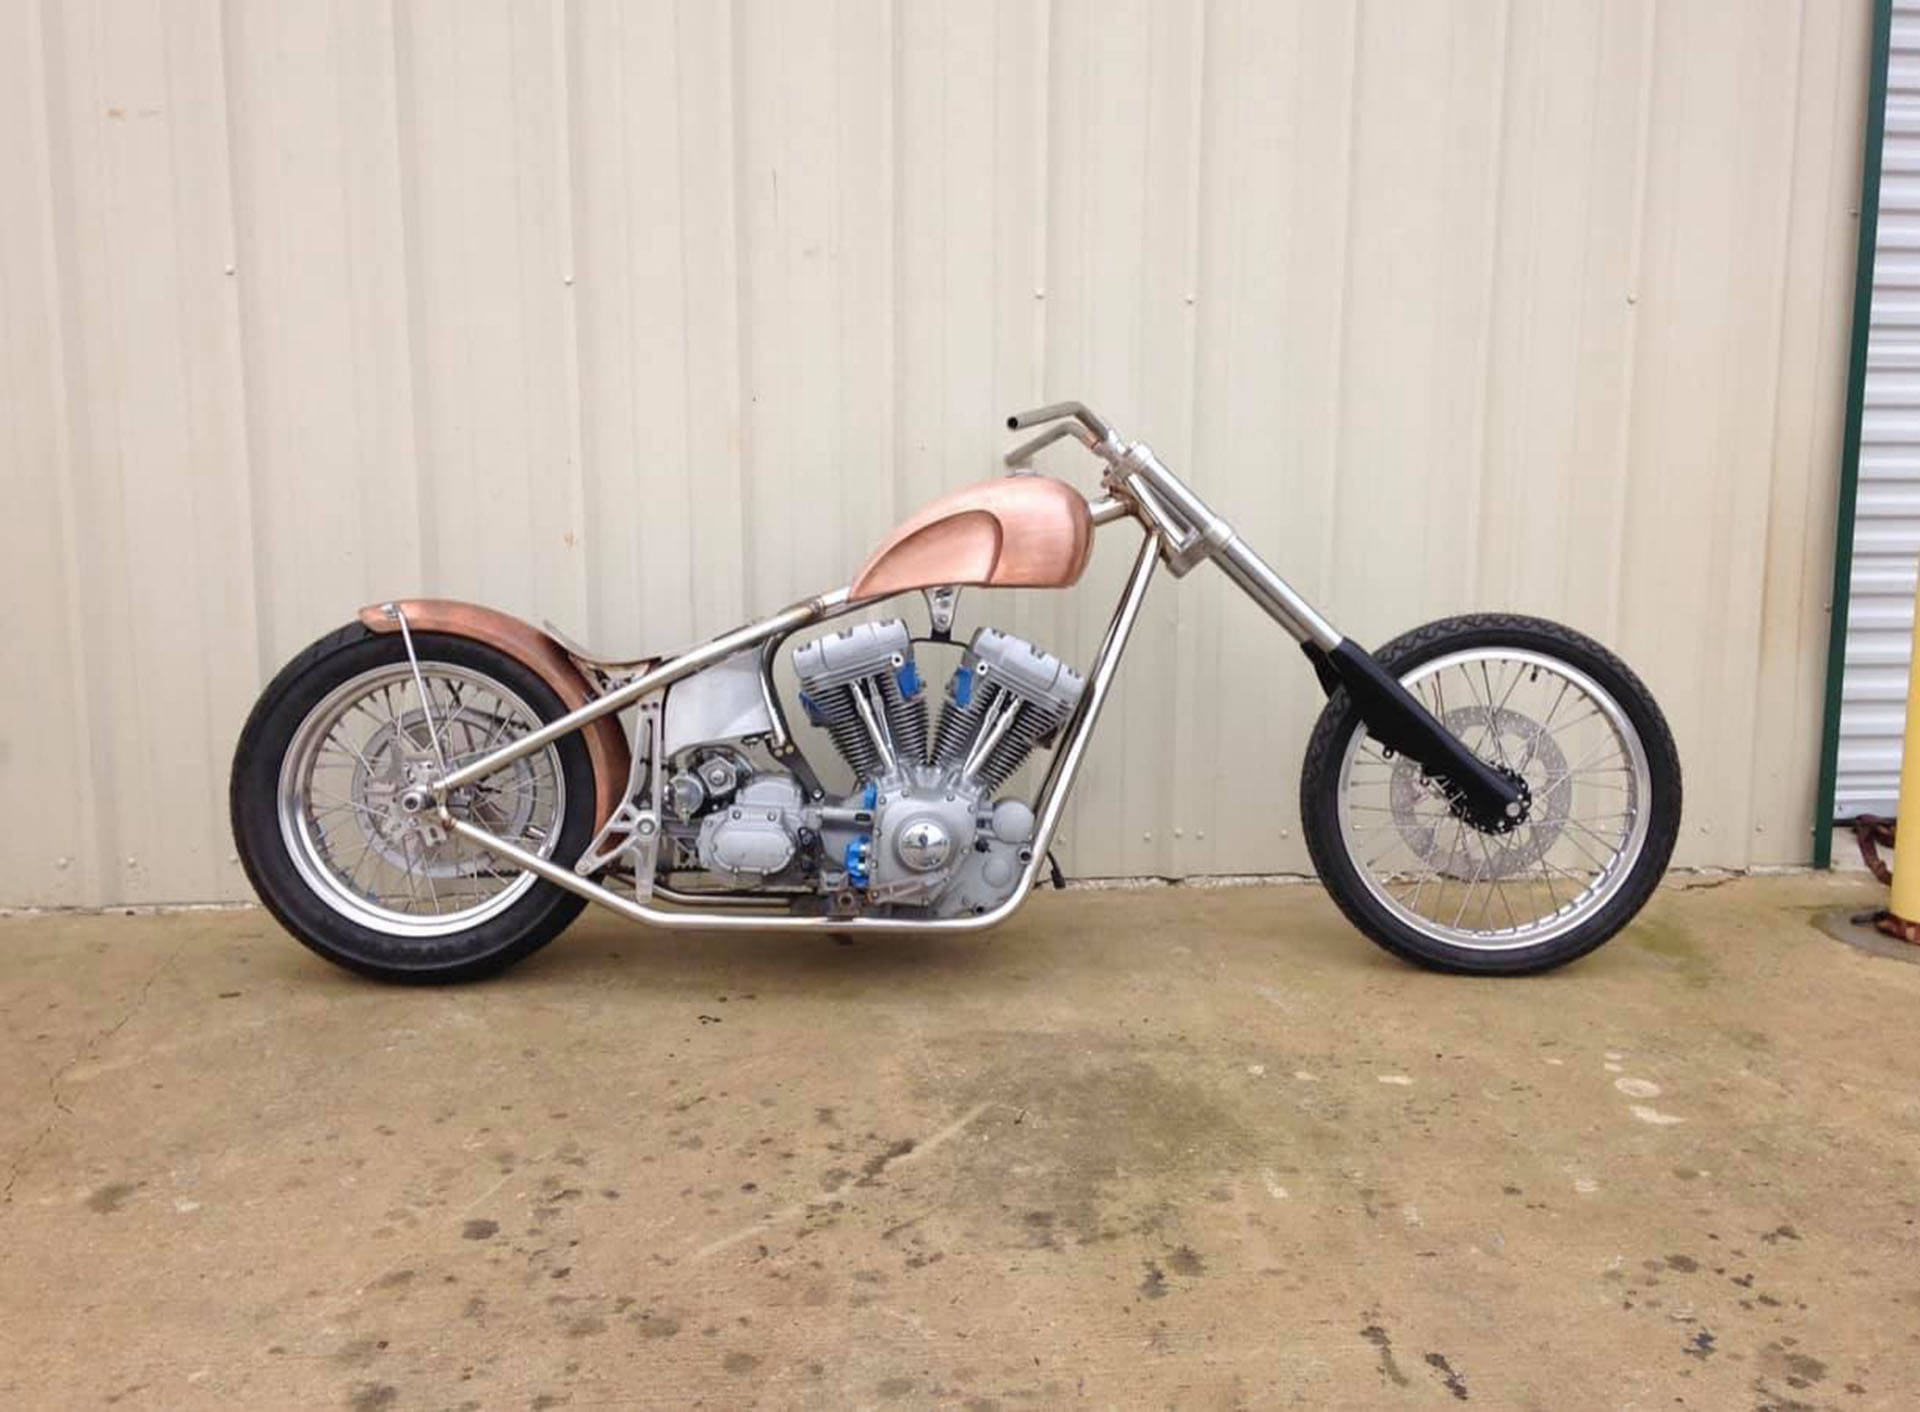 West Coast Choppers Bobber Motorcycle